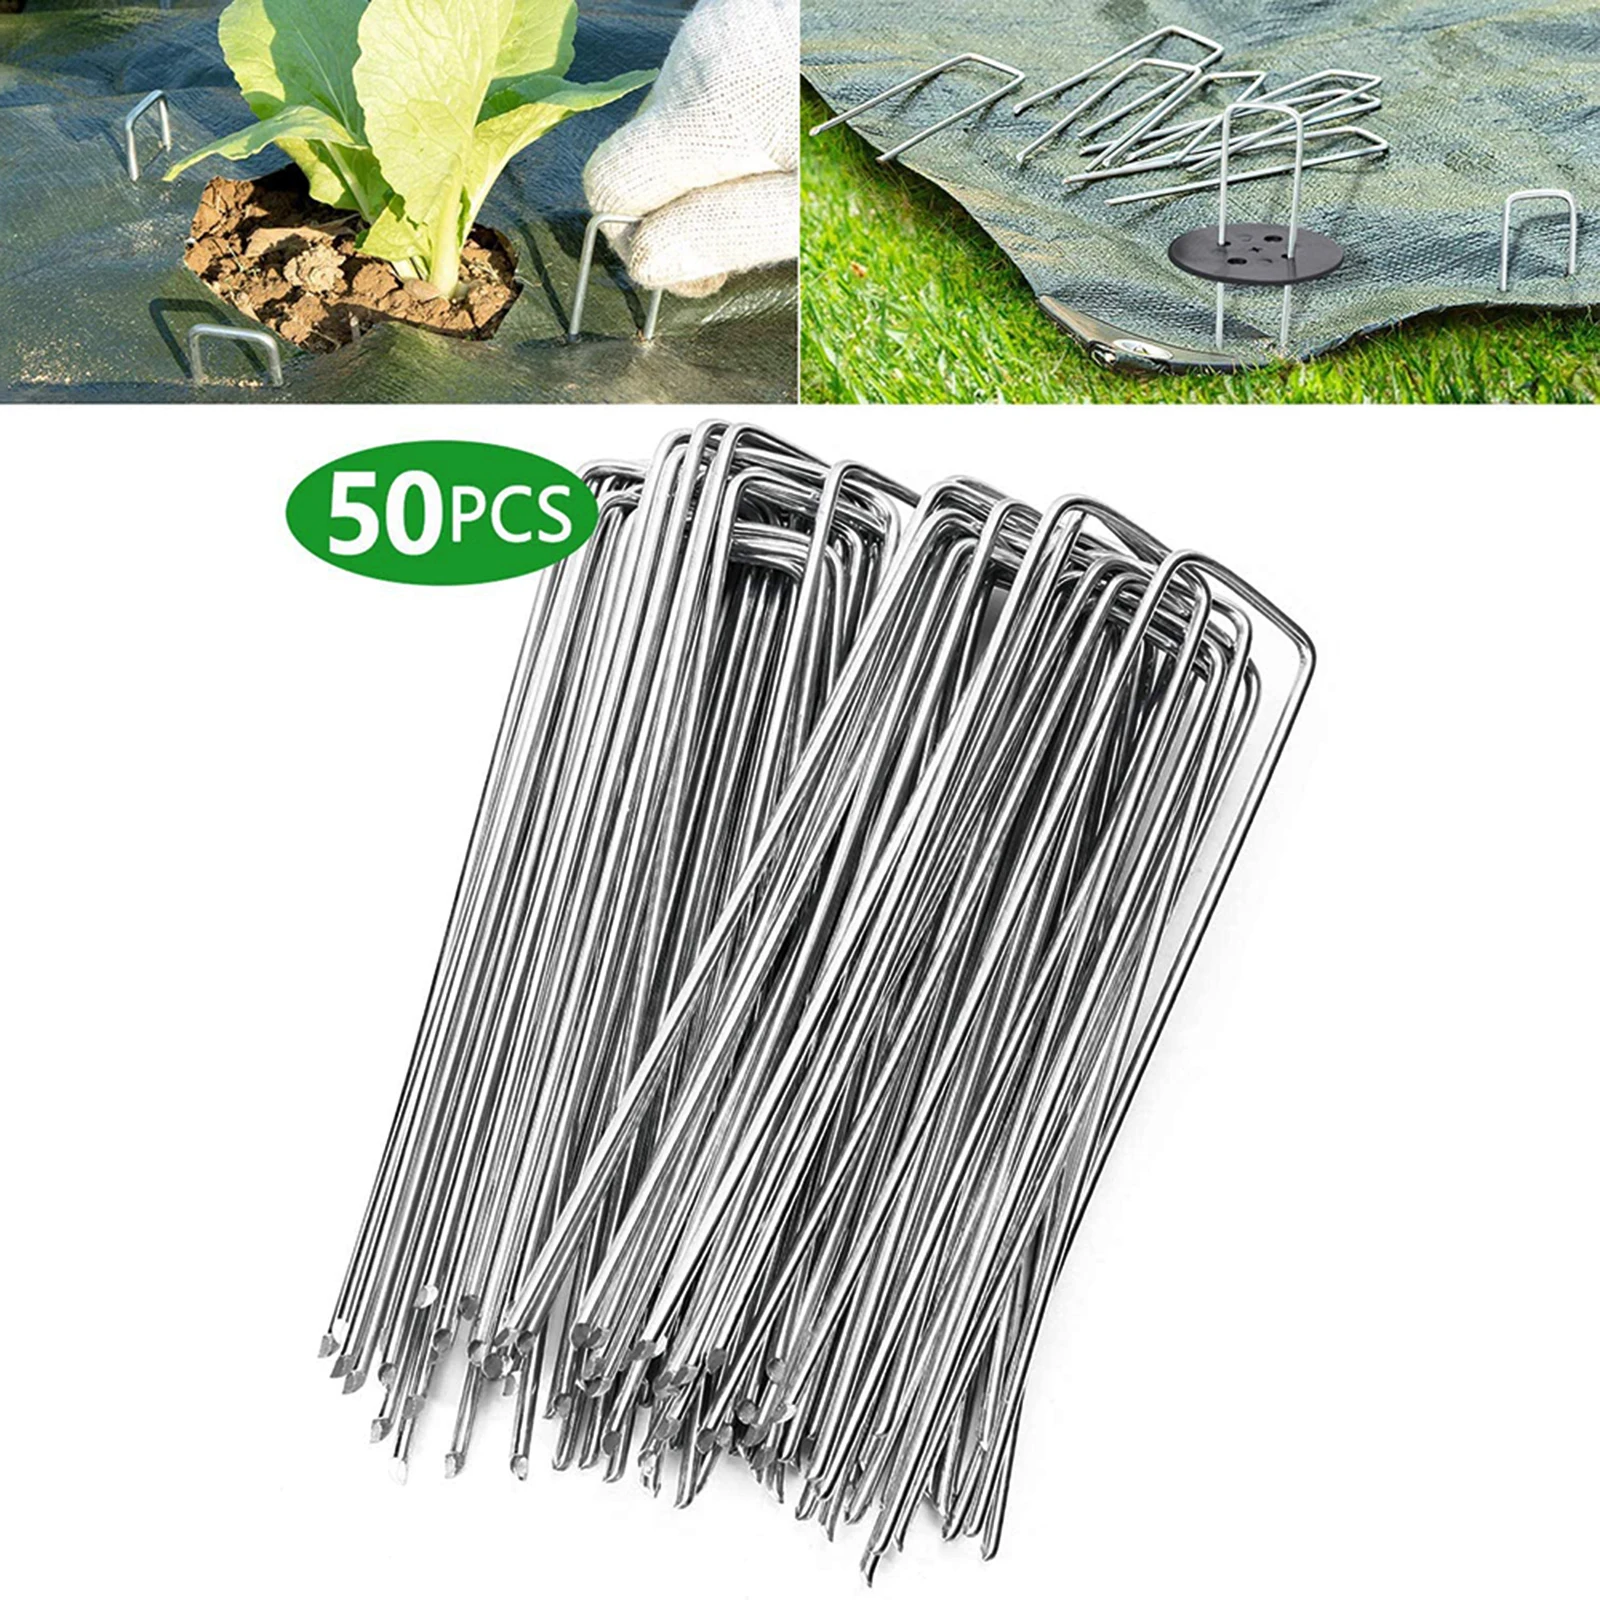 50 pcs U Shape 11 Gauge Galvanized Steel Garden Stakes Staple Securing Pegs For Weed Barrier Landscape Fabric Netting